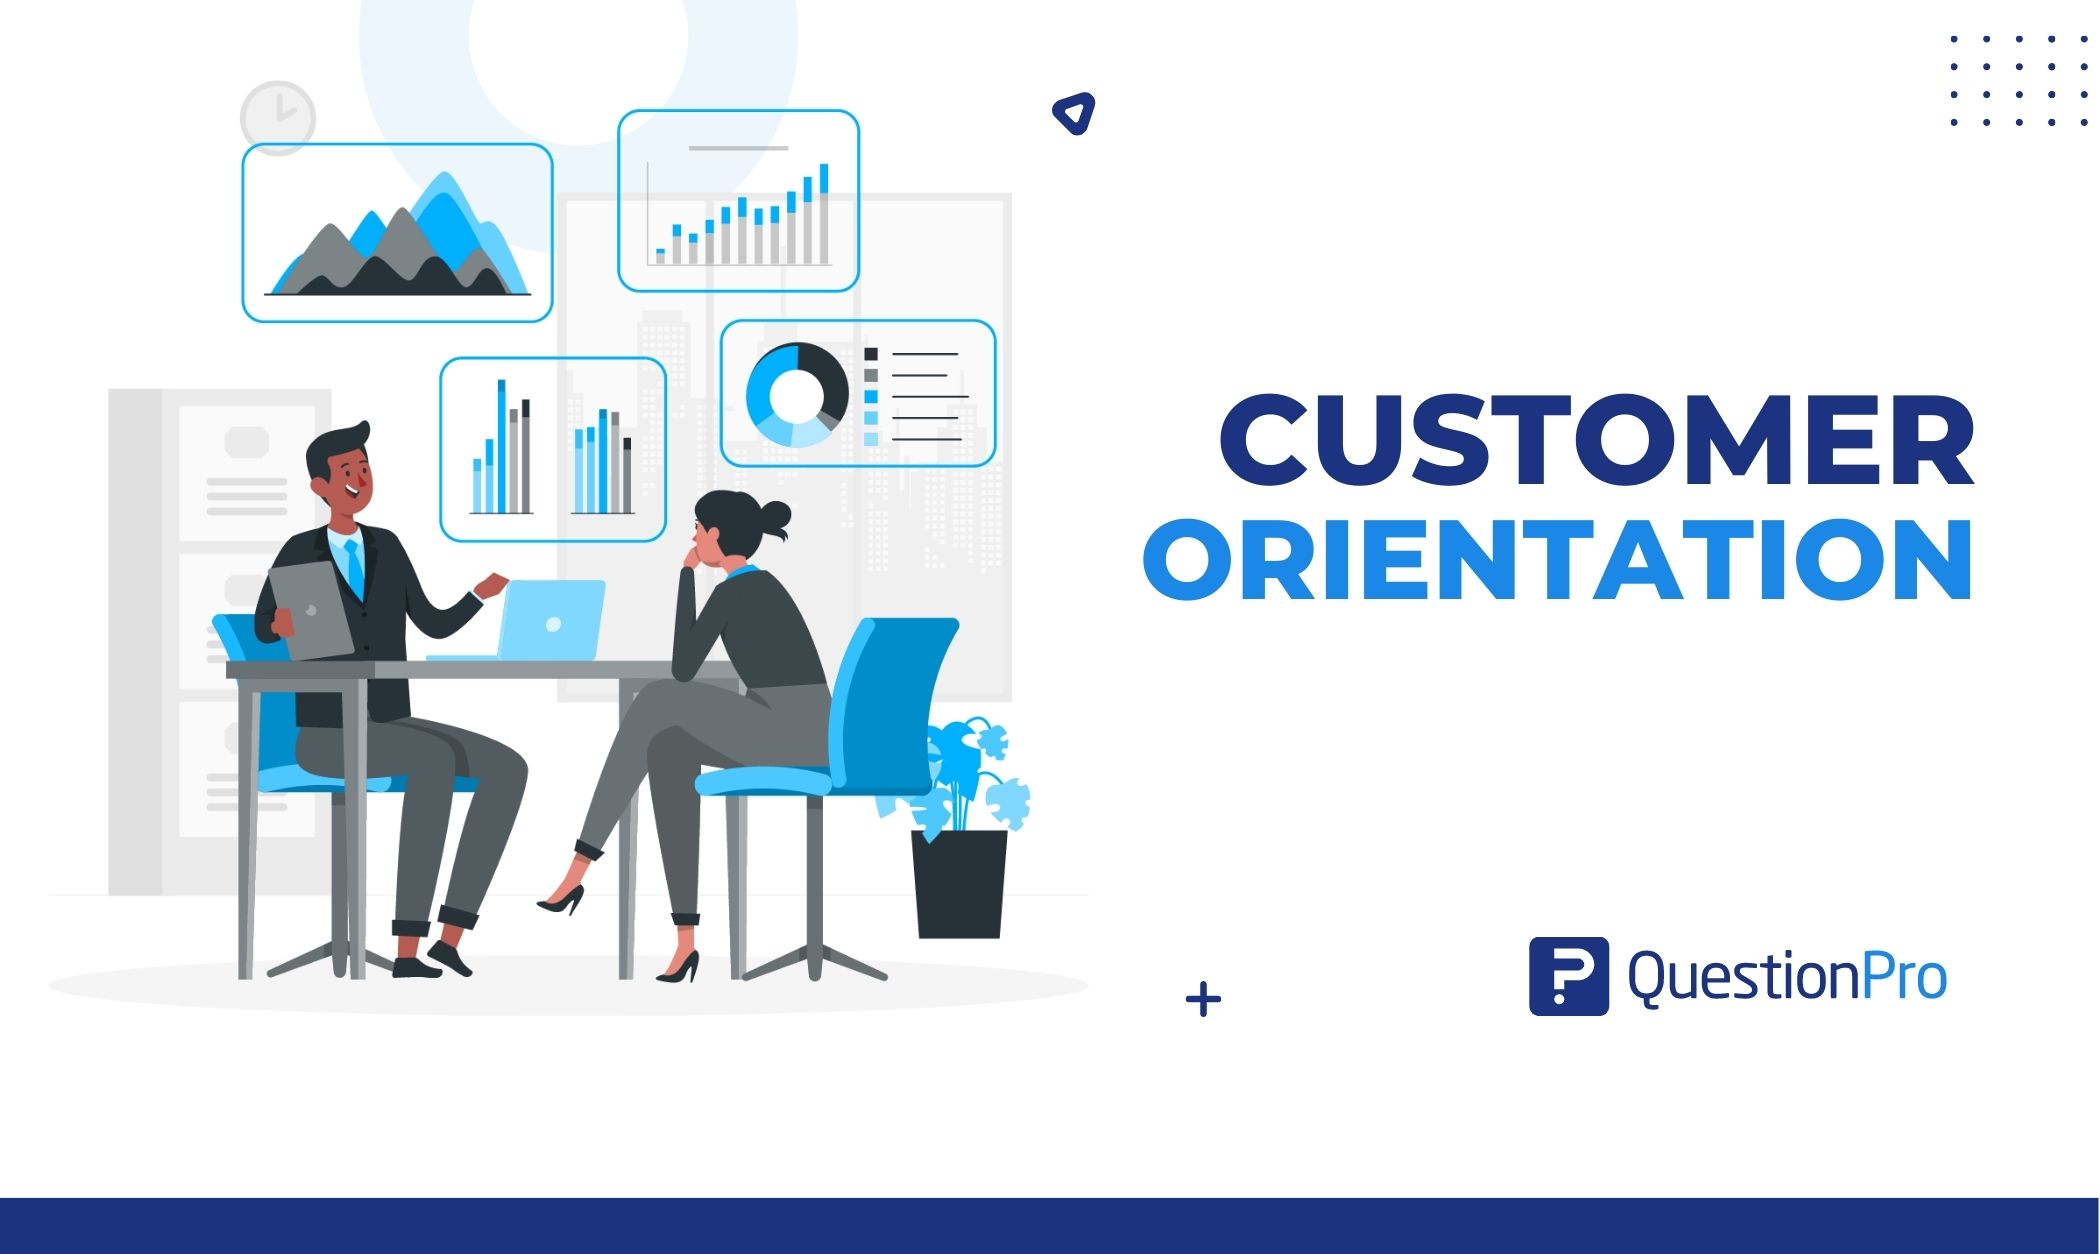 Customer orientation focuses on customers' demands and interests. It's about knowing what customers want and offering the best experience.